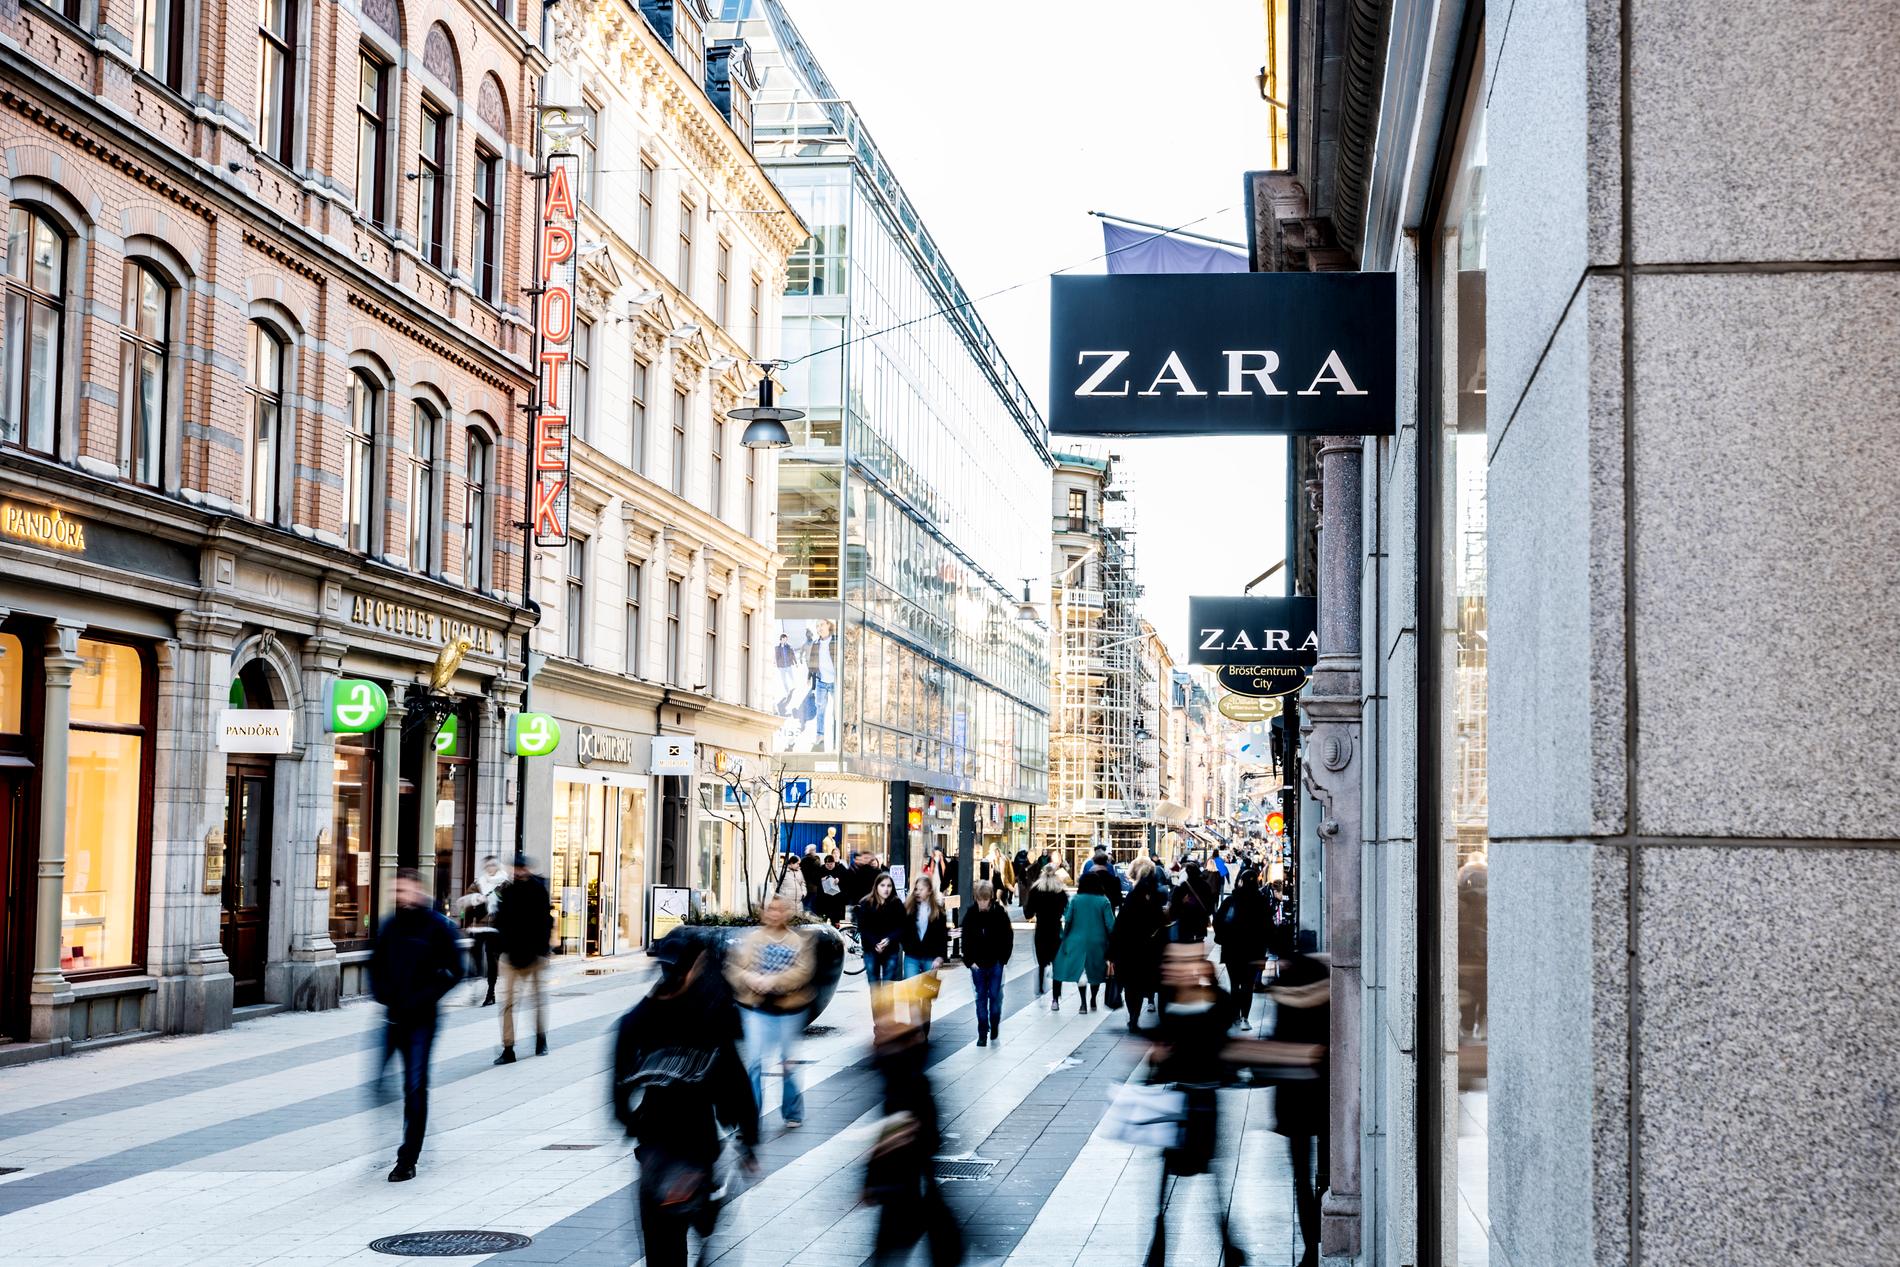 "The staff lies to the customers straight to their faces,” according to a former employee at Zara.